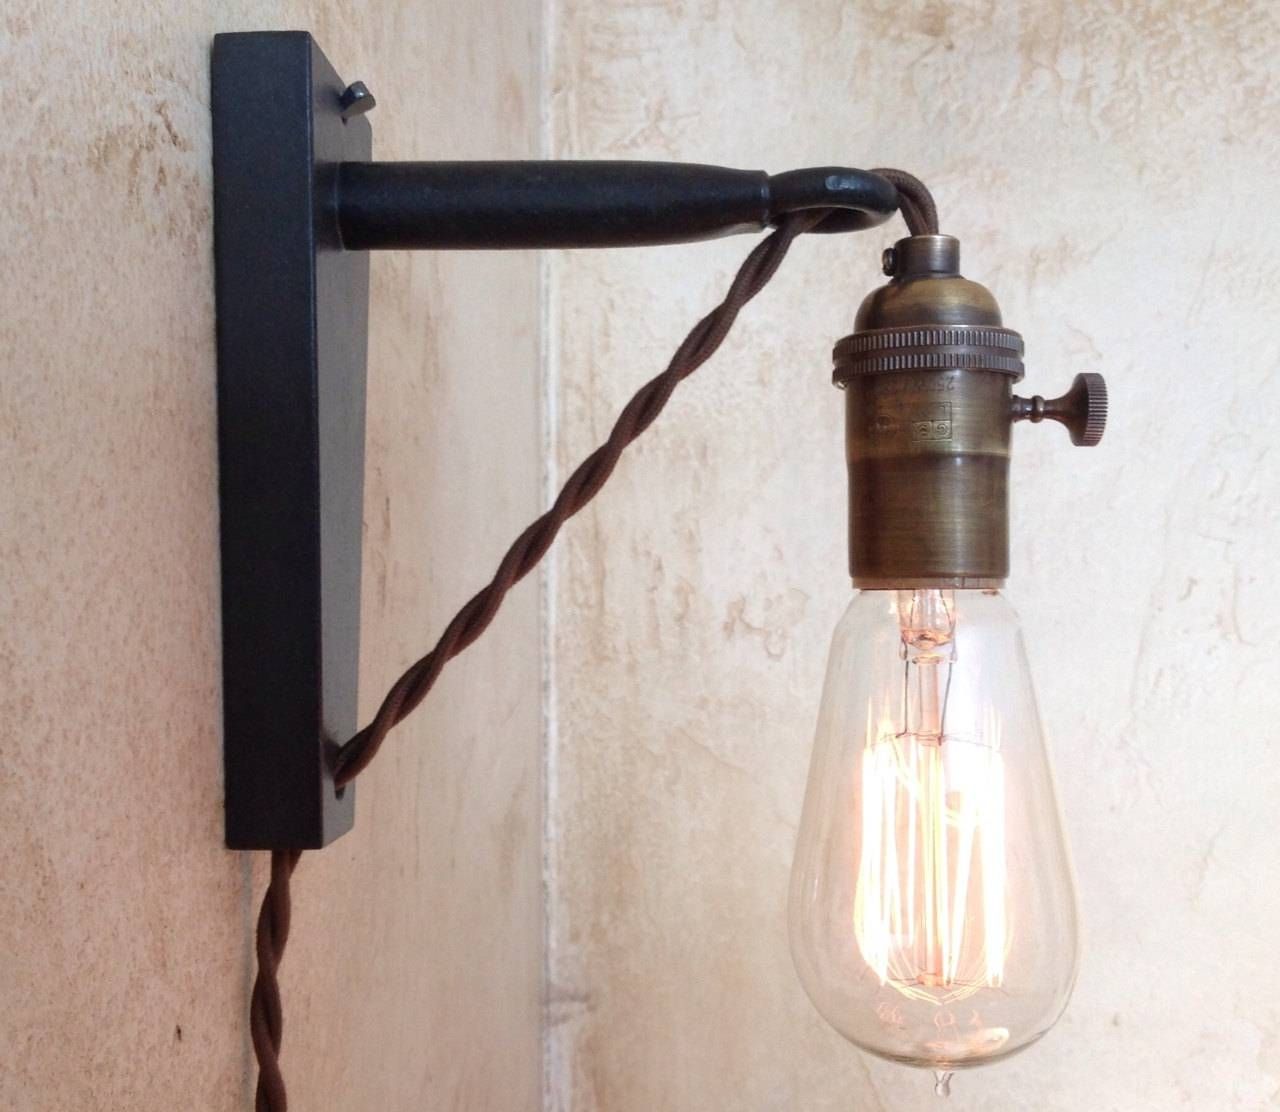 Modern Plug In Hanging Lamp | Med Art Home Design Posters Within Plug In Hanging Pendant Lights (View 8 of 15)